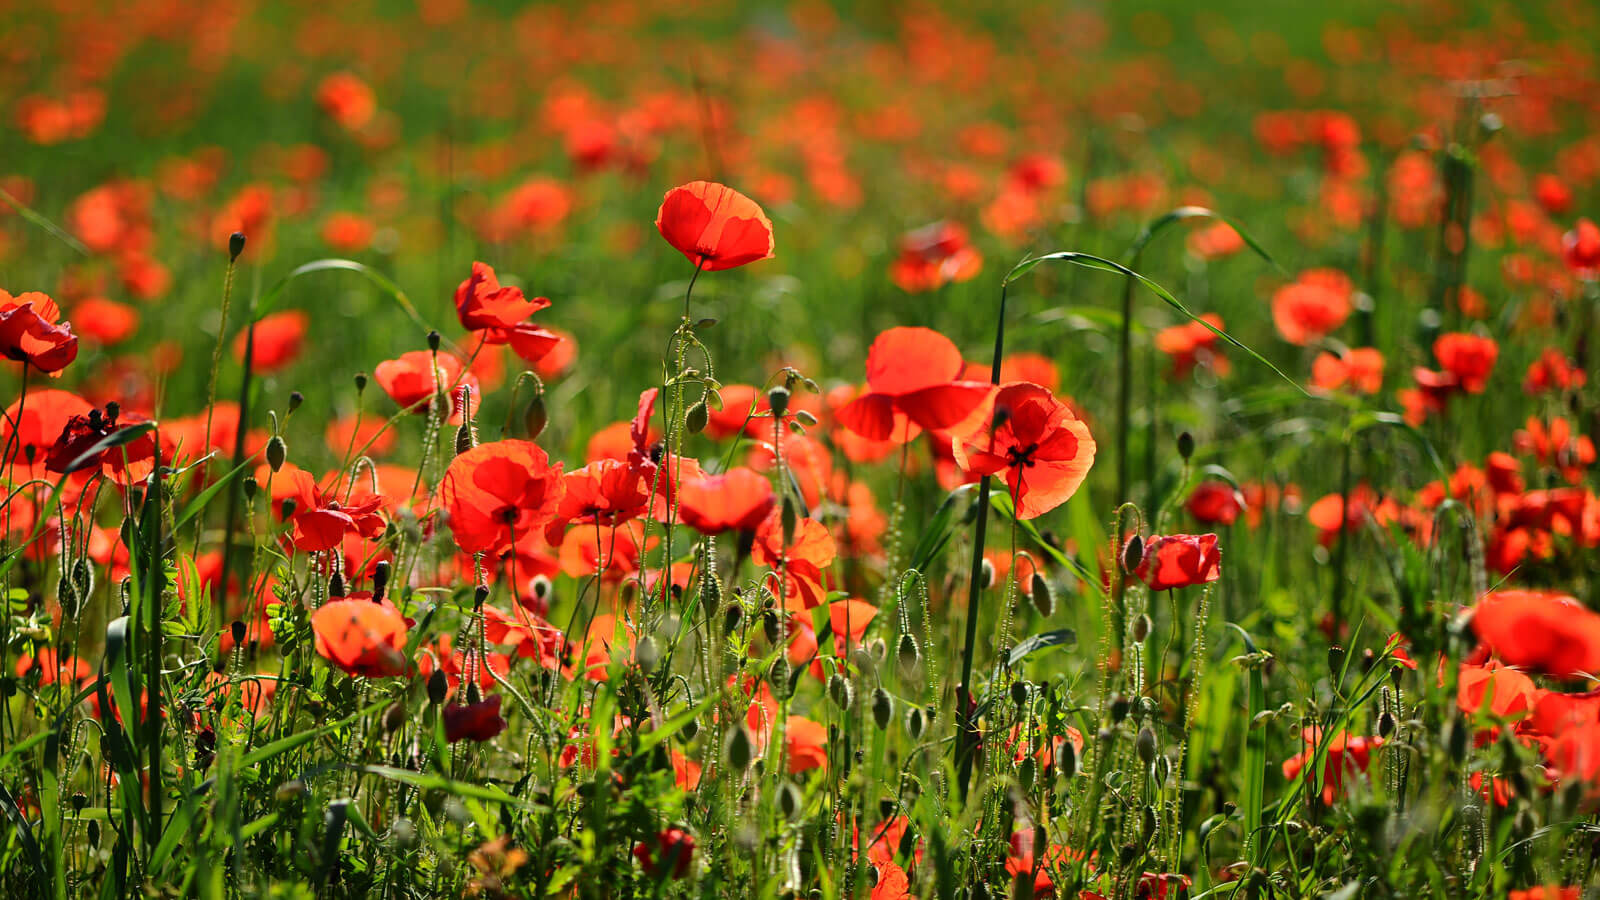 We love when spring comes and that the poppies return every year